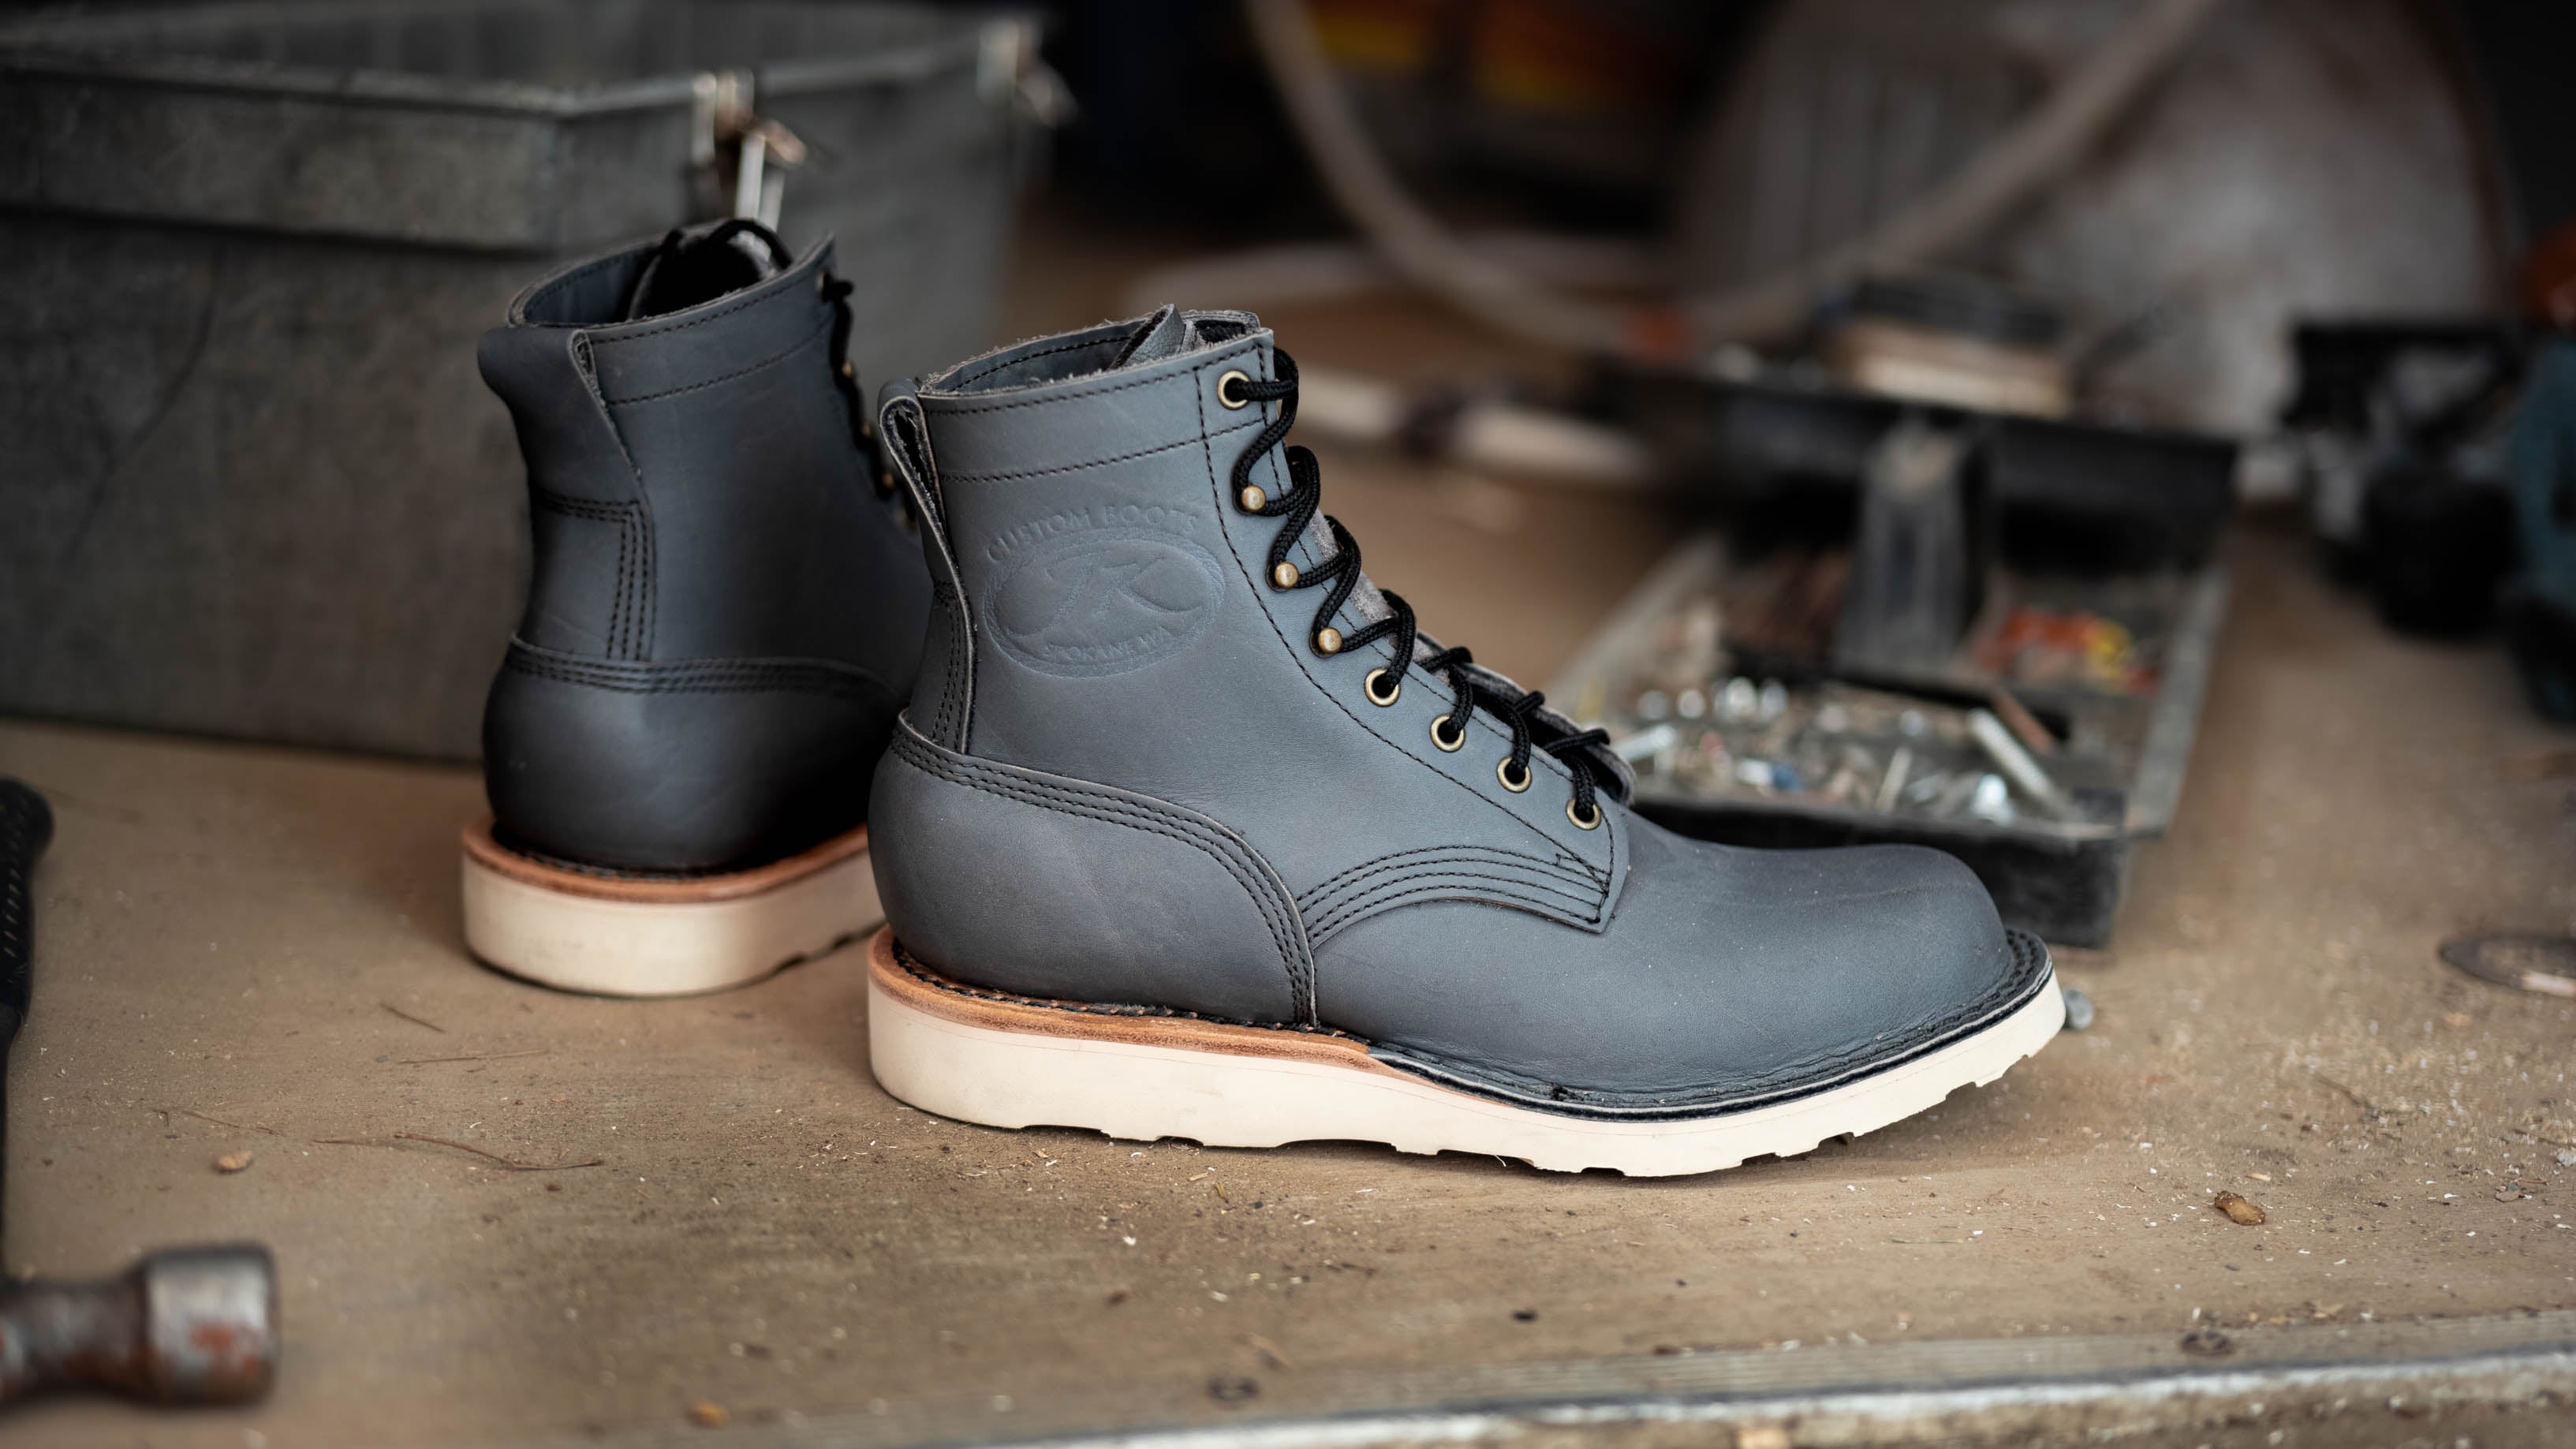 Forefront Boots – JK Boots